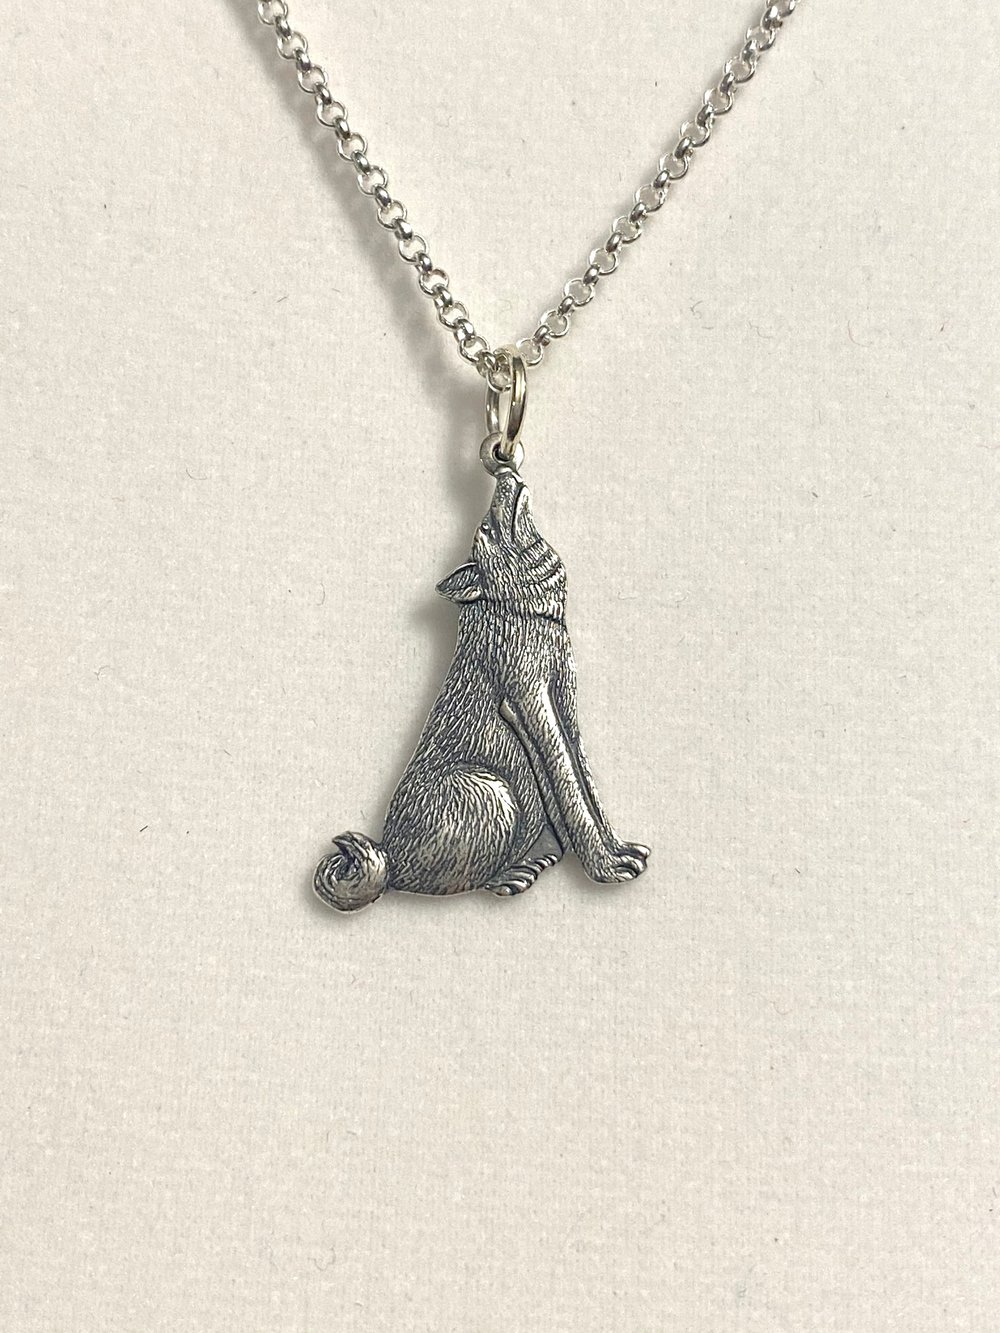 Silver Plated Wolf and Chain Necklace